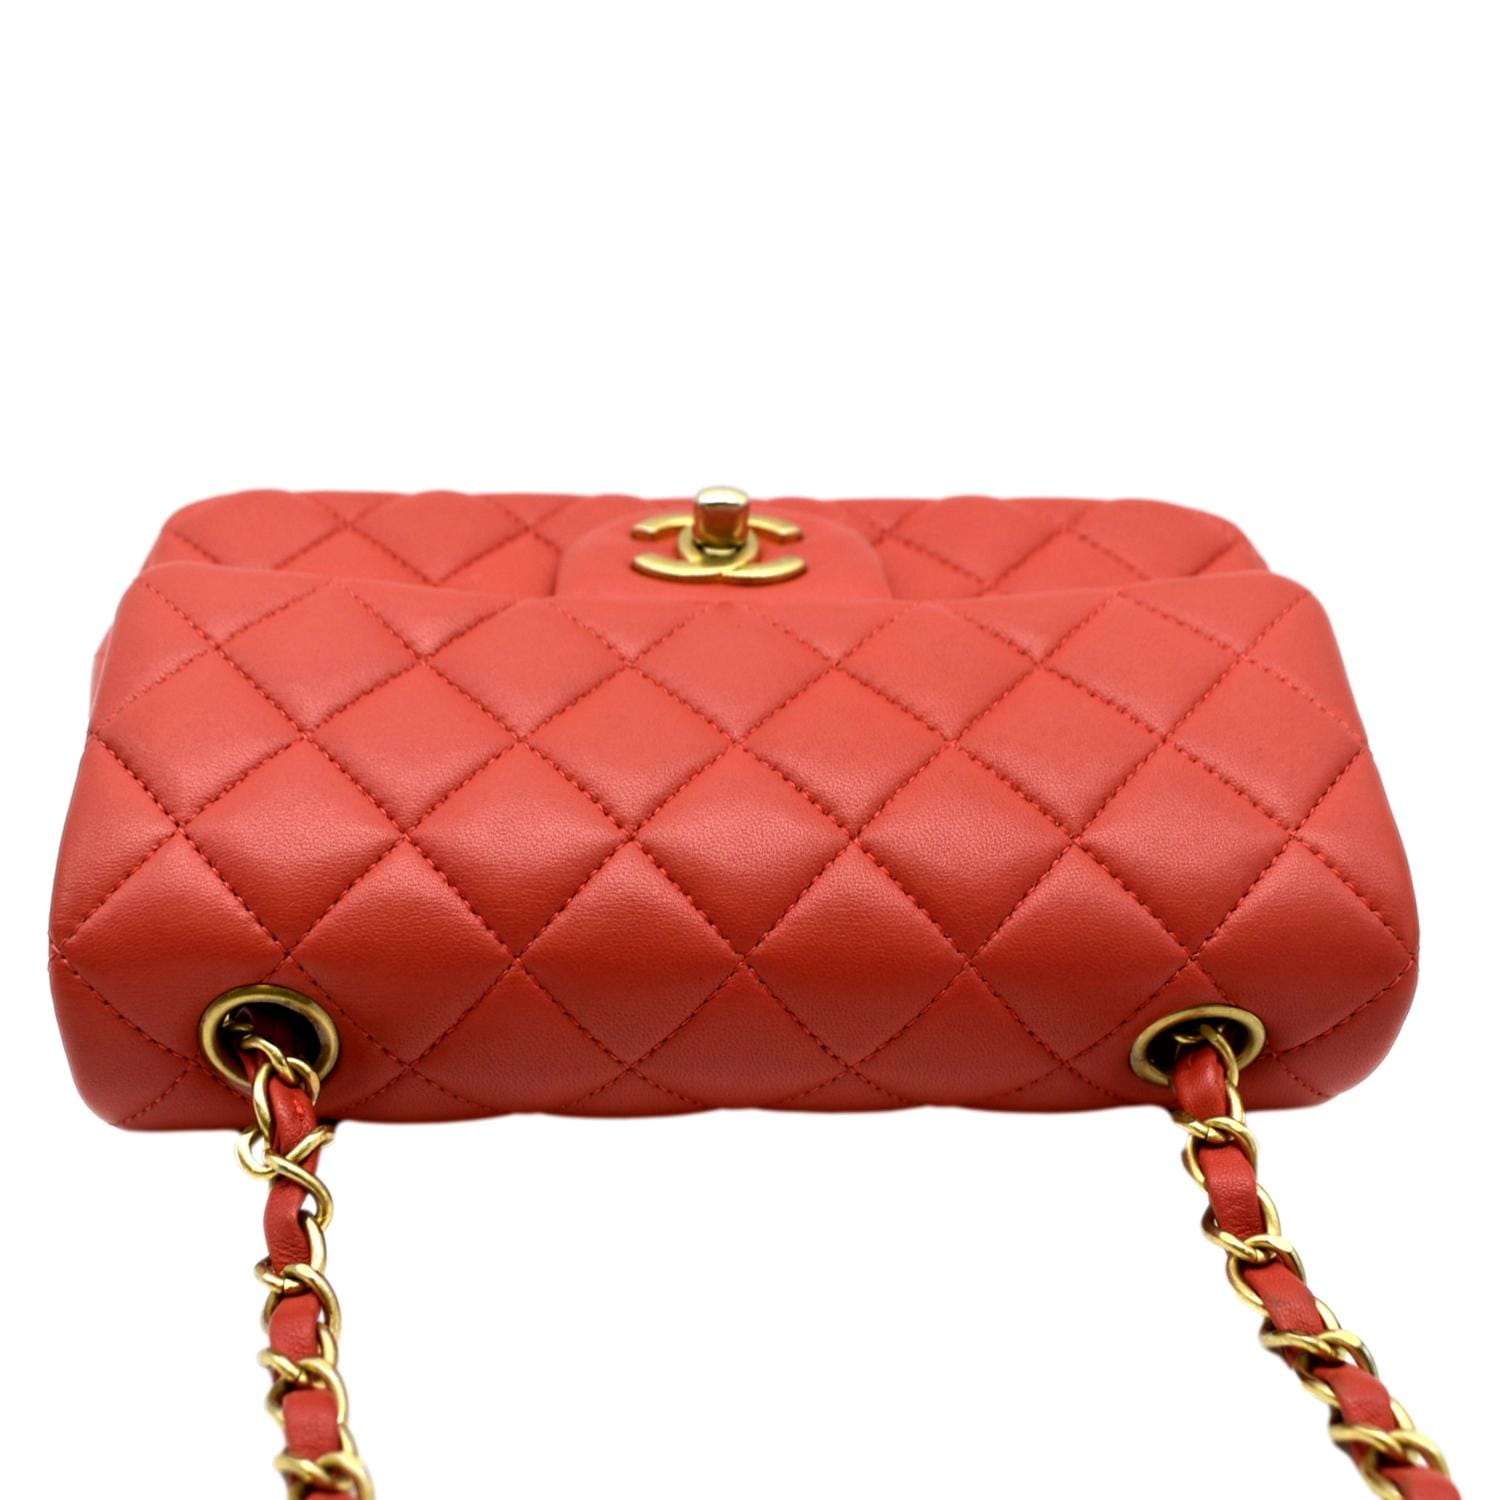 CHANEL Mini Rectangular Flap Quilted Leather Crossbody Bag Red